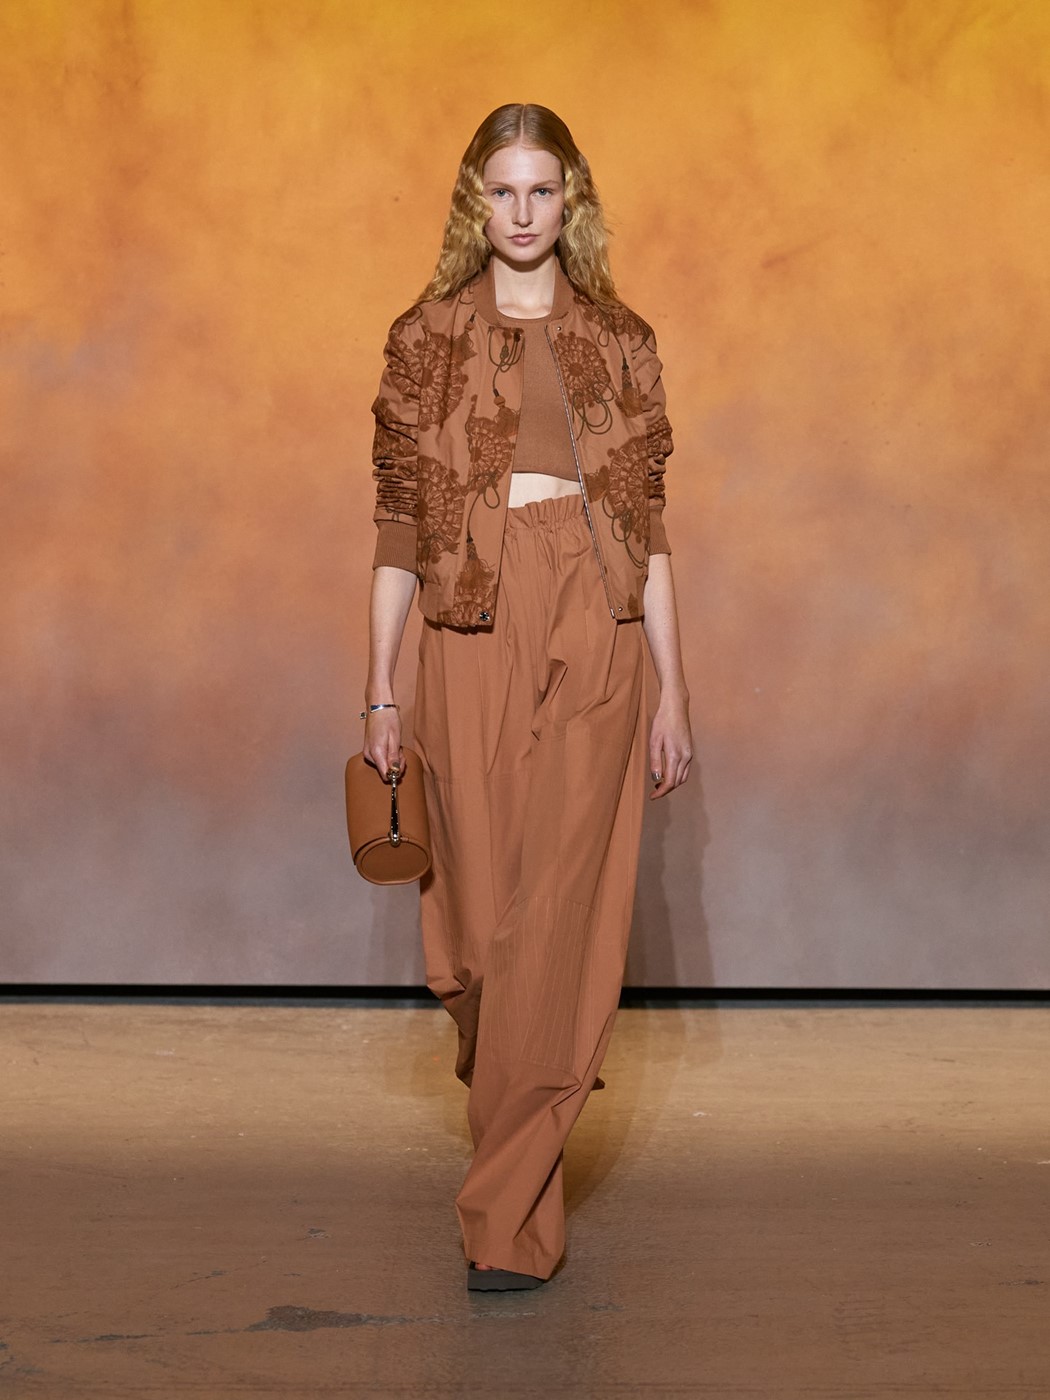 Hermès Spring/Summer 2022 collection includes the Colormatic